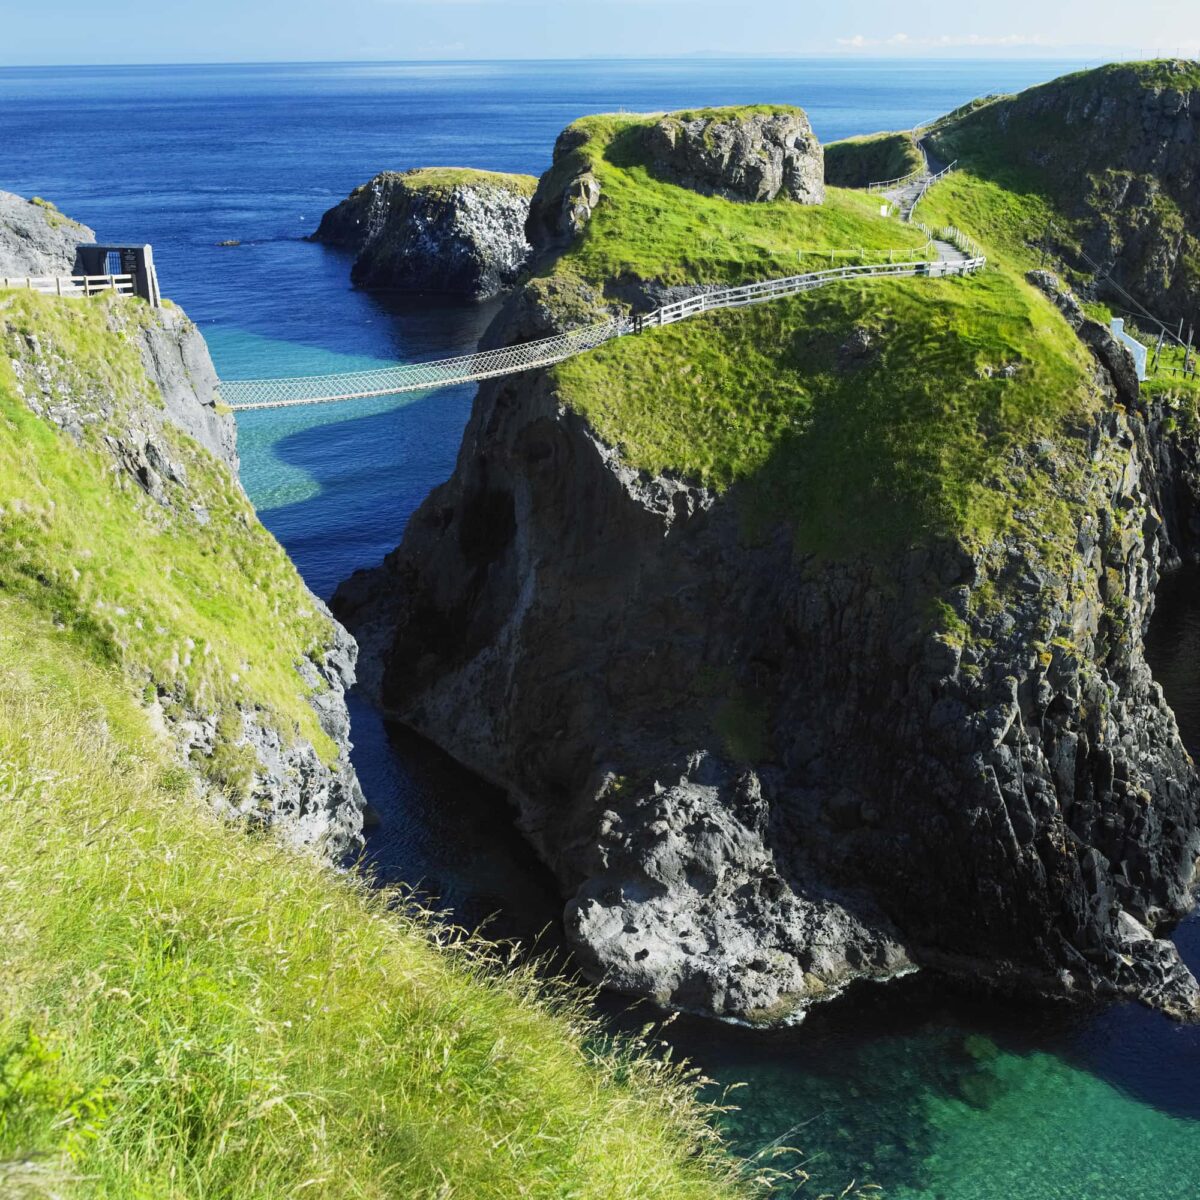 Cool things to do in Ireland from your Irish bucket list carric-a-rede rope bridge